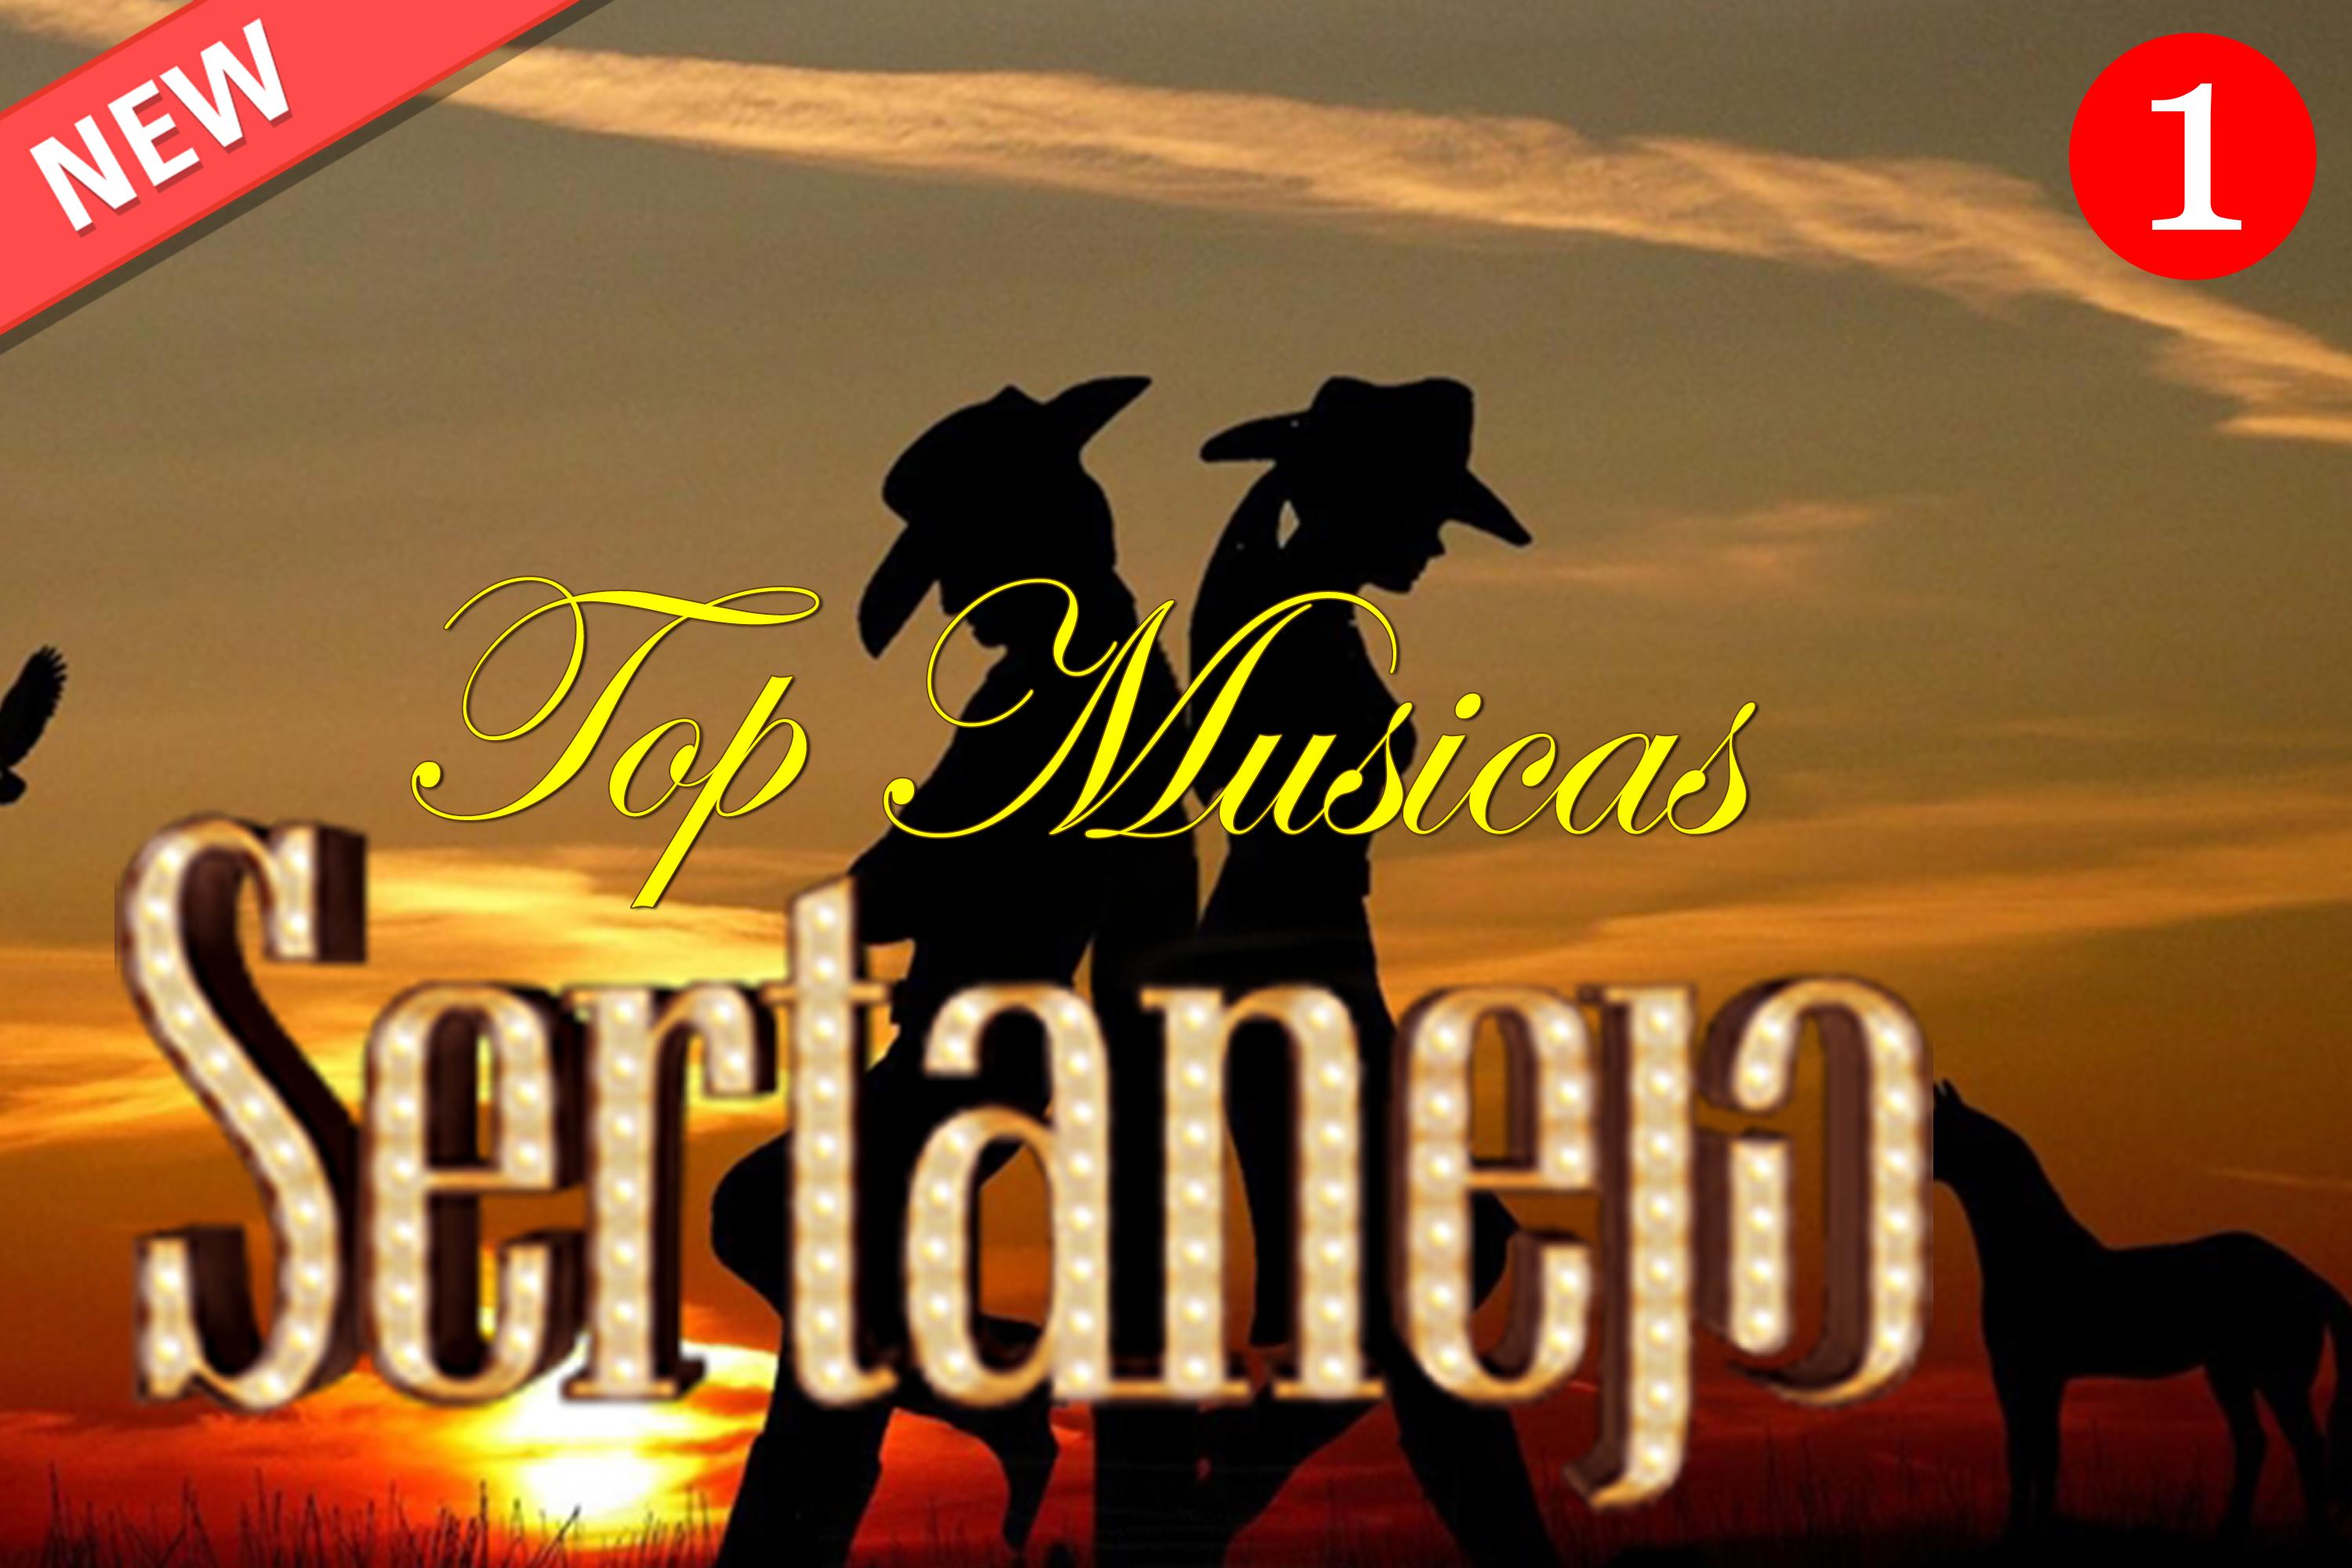 TOP 500 Musicas Sertanejo for Android - APK Download